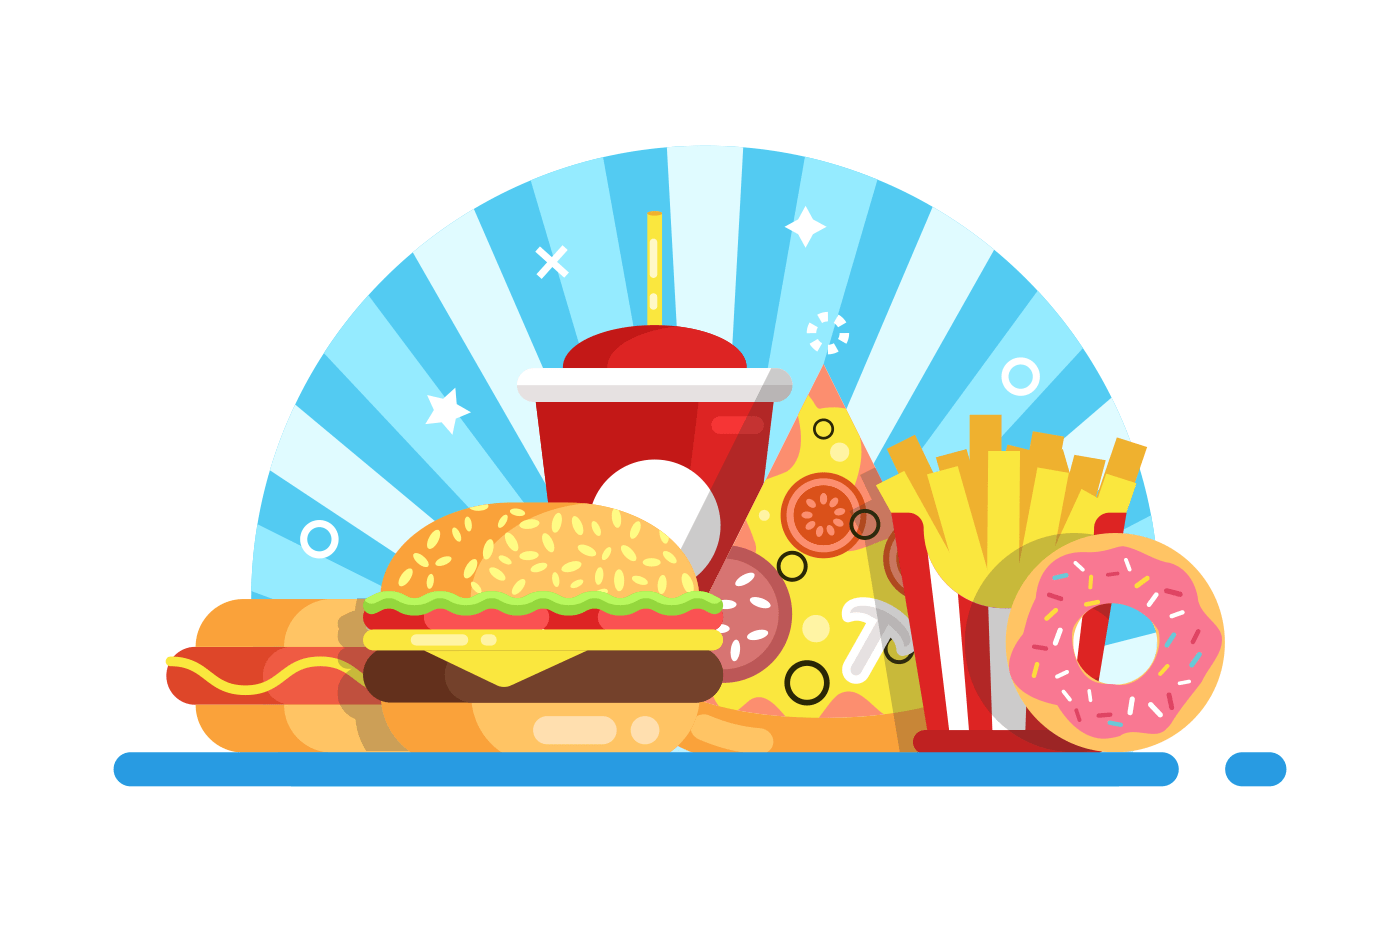 Burger, french fried, pizza, donut and cola. Fast food set composition. Flat style Vector illustration.